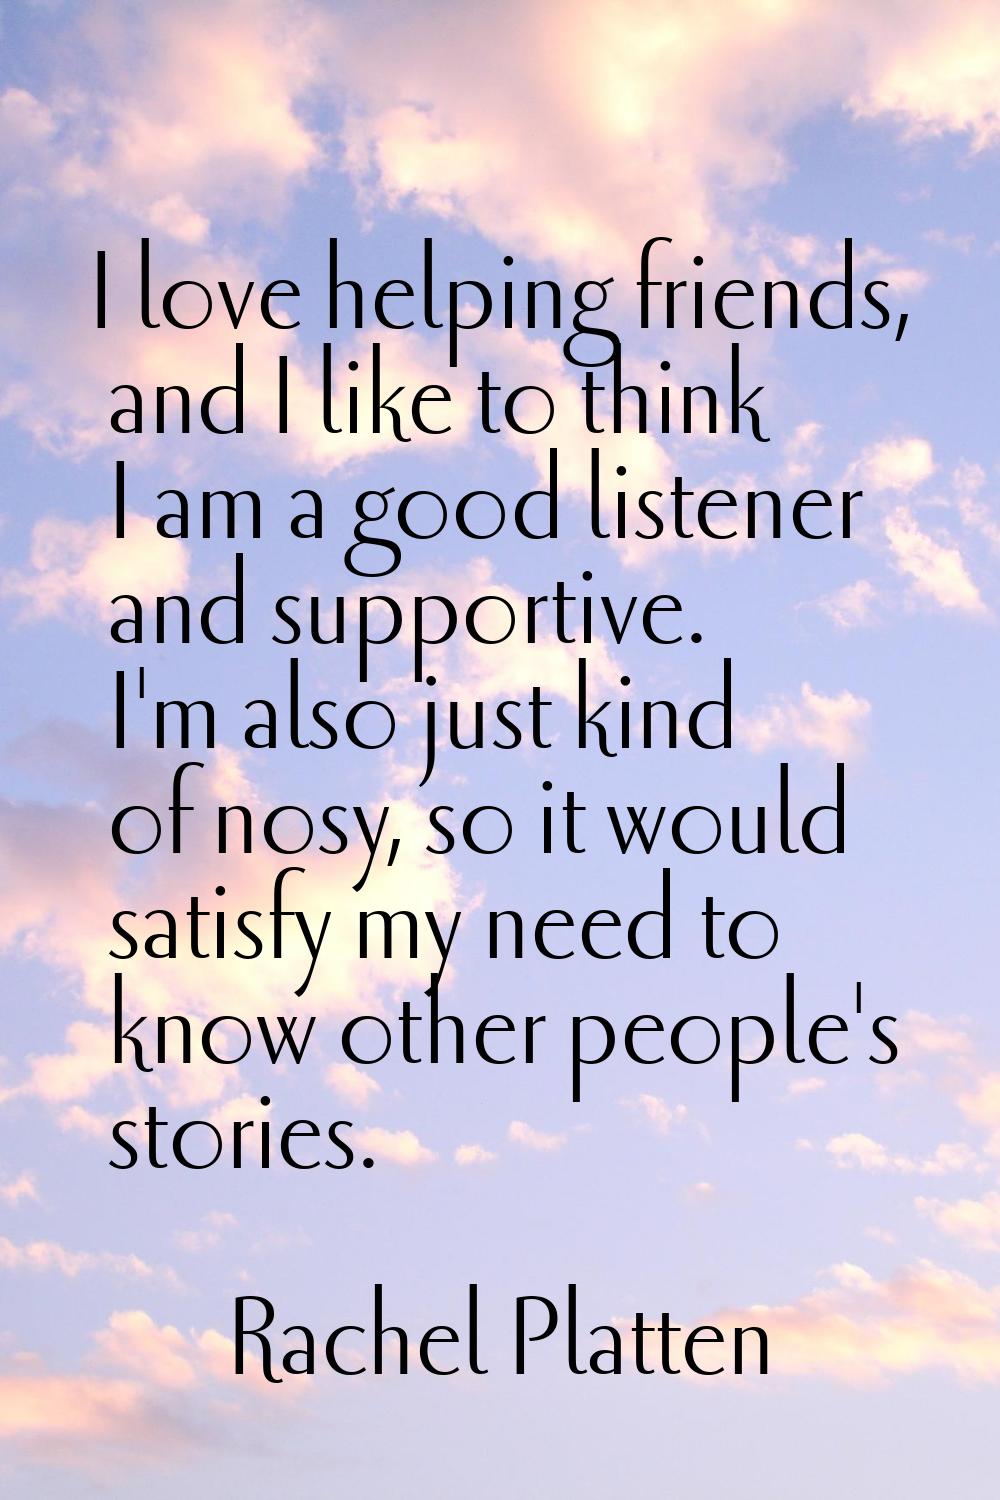 I love helping friends, and I like to think I am a good listener and supportive. I'm also just kind